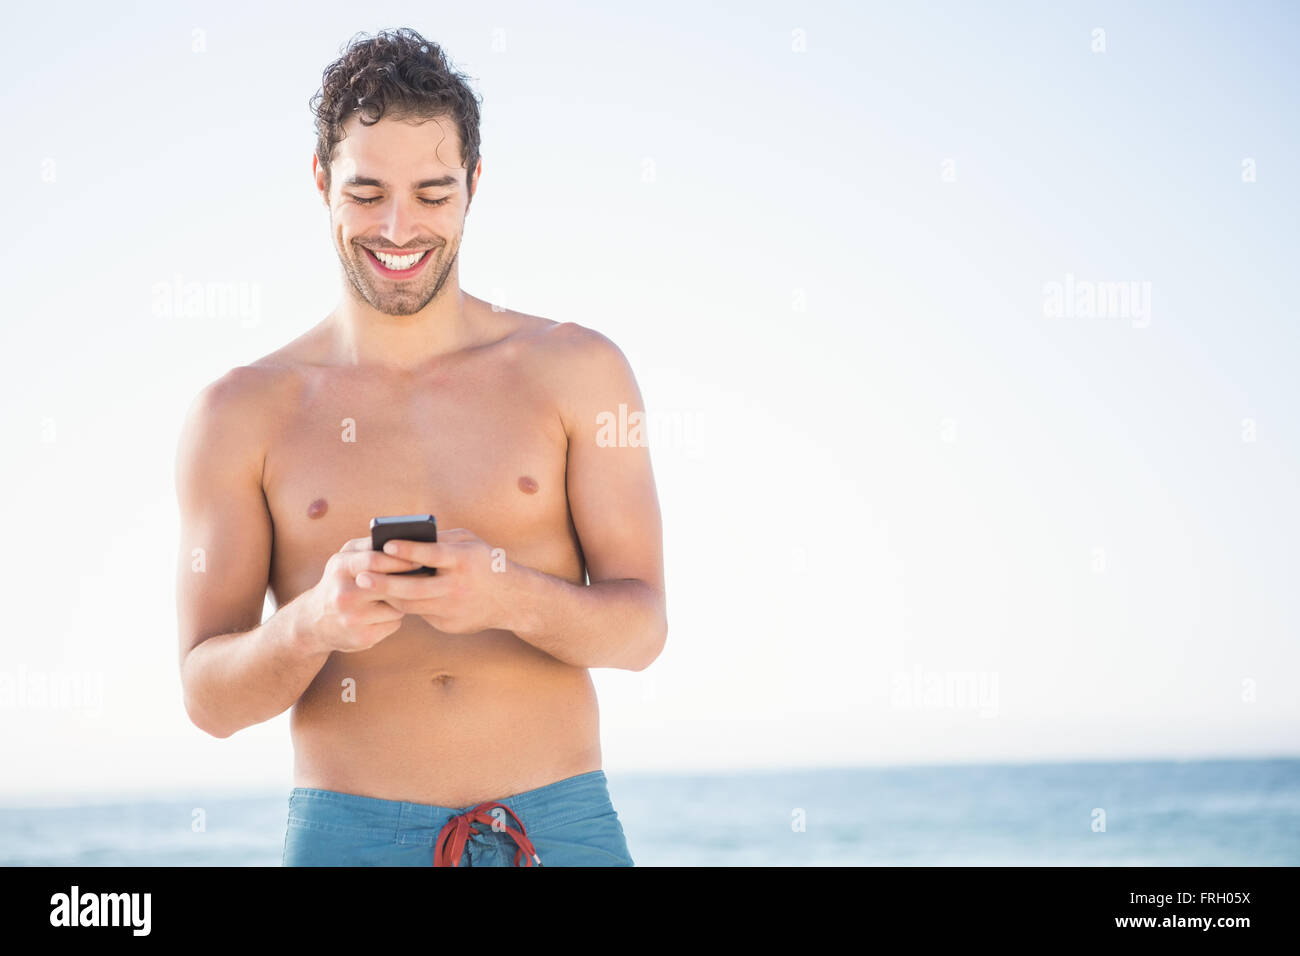 Smiling fit man using smartphone Banque D'Images